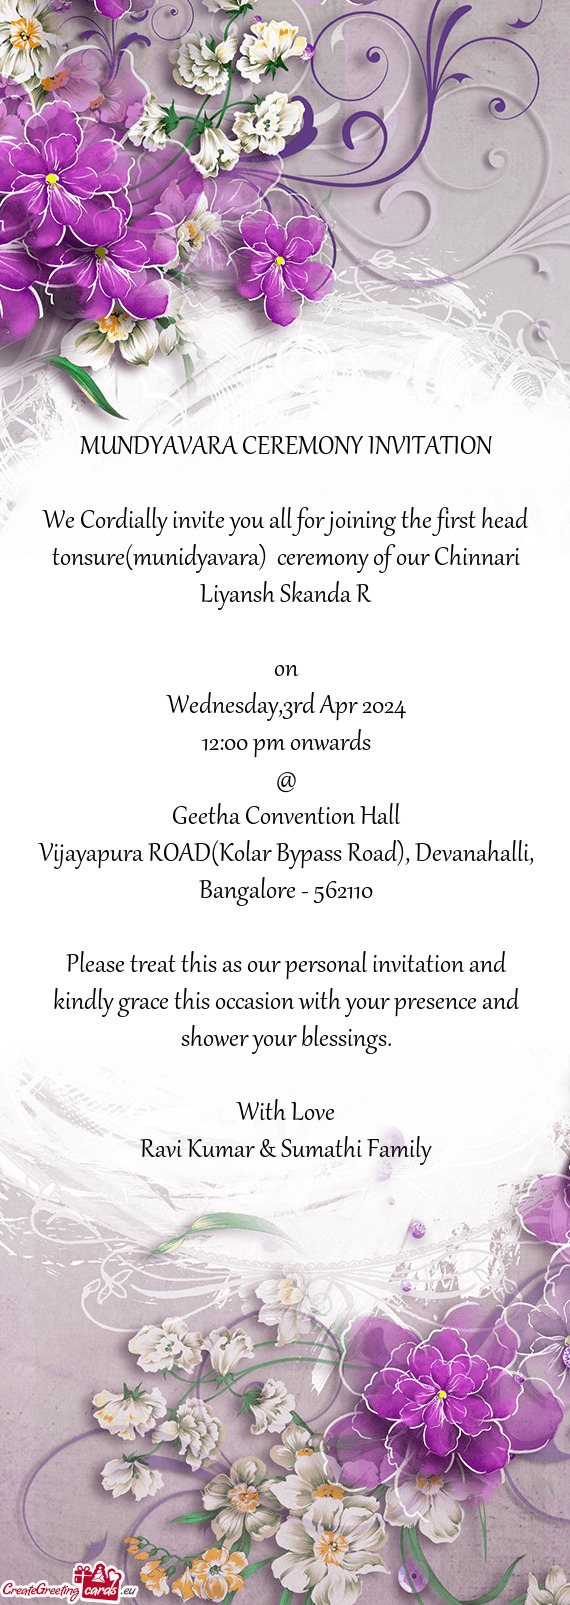 We Cordially invite you all for joining the first head tonsure(munidyavara) ceremony of our Chinnar